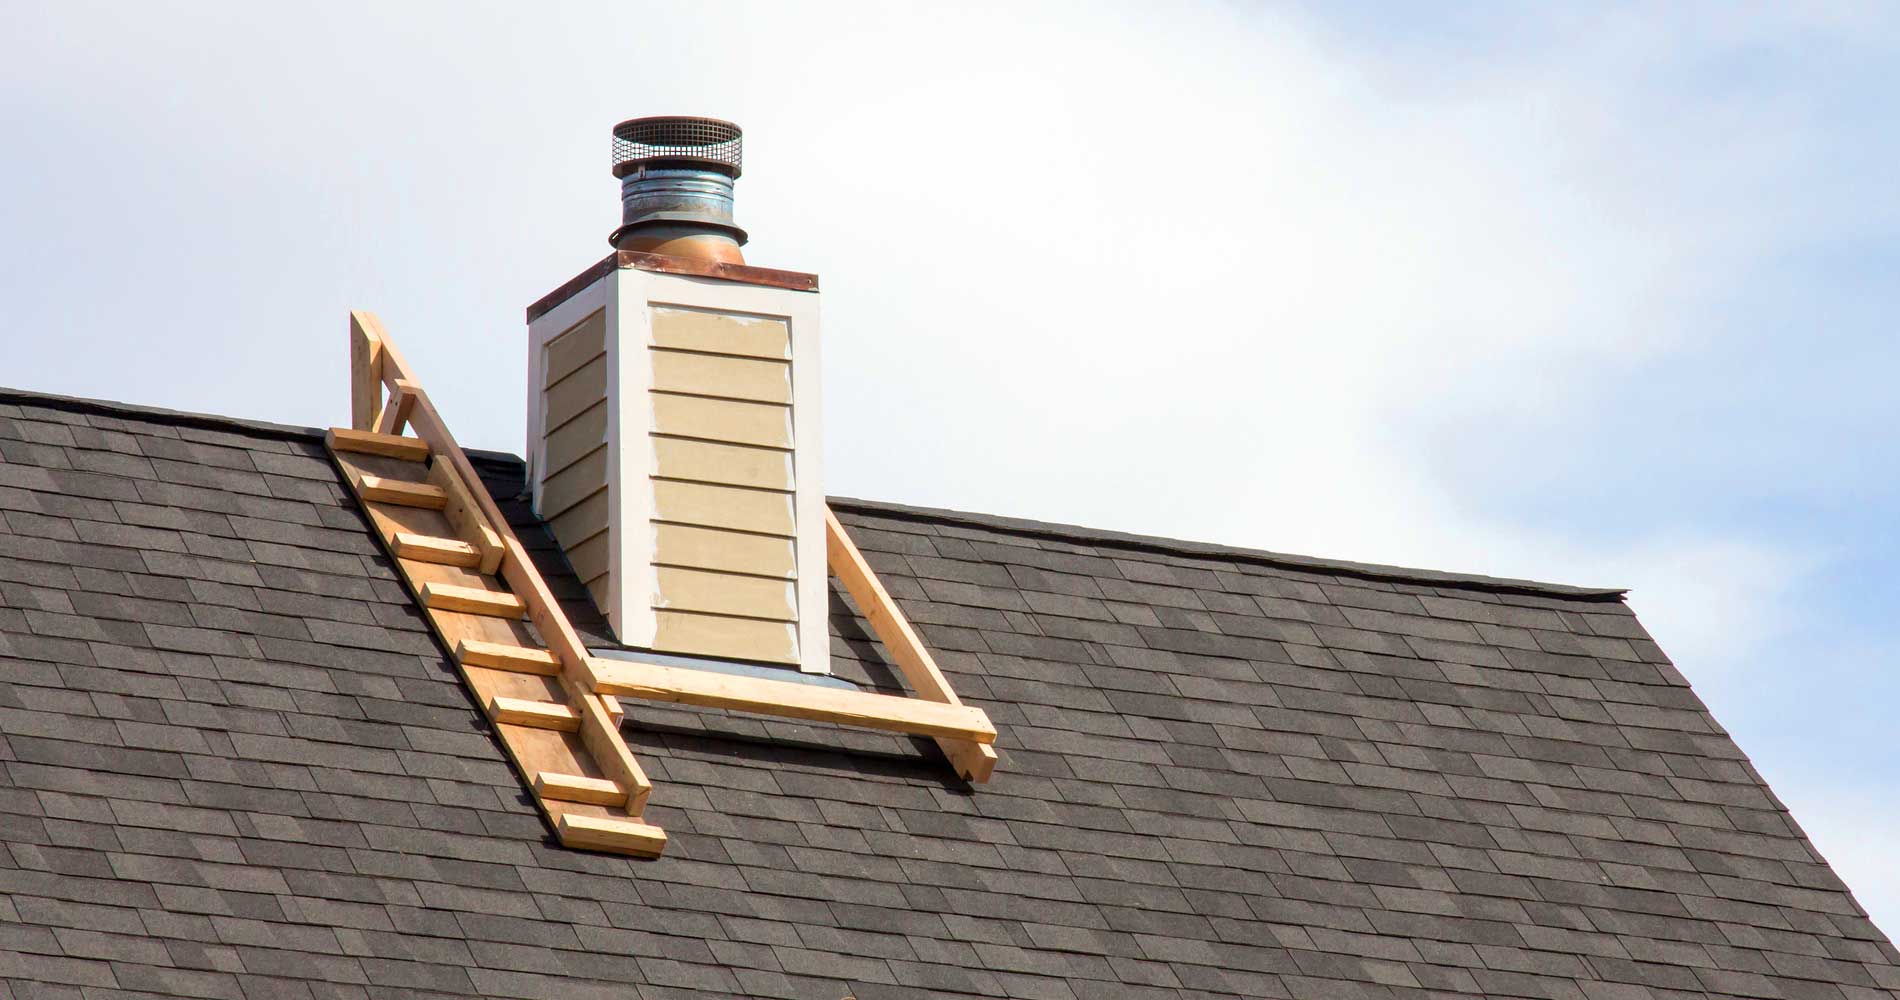 Chimney Repair & Replacement in North Jersey